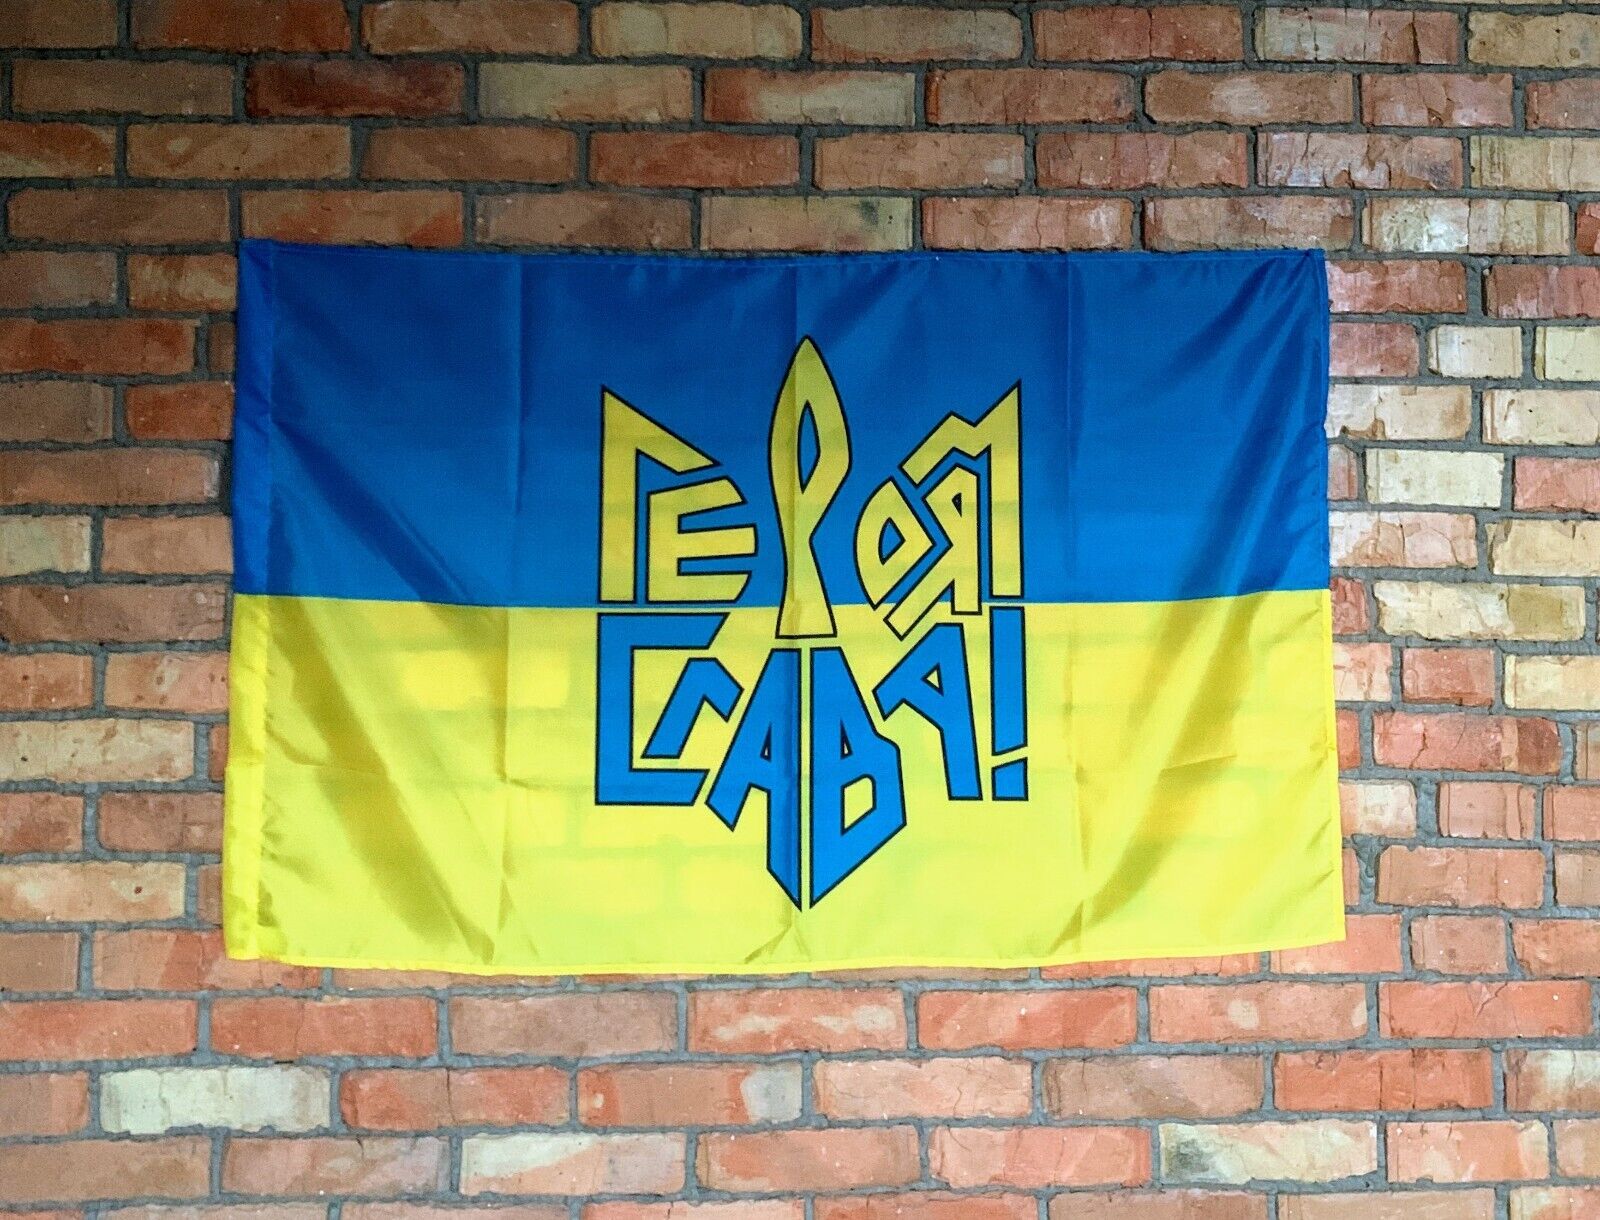 Ukrainian Large Flag 120*80 cm with trident. Glory to the heroes